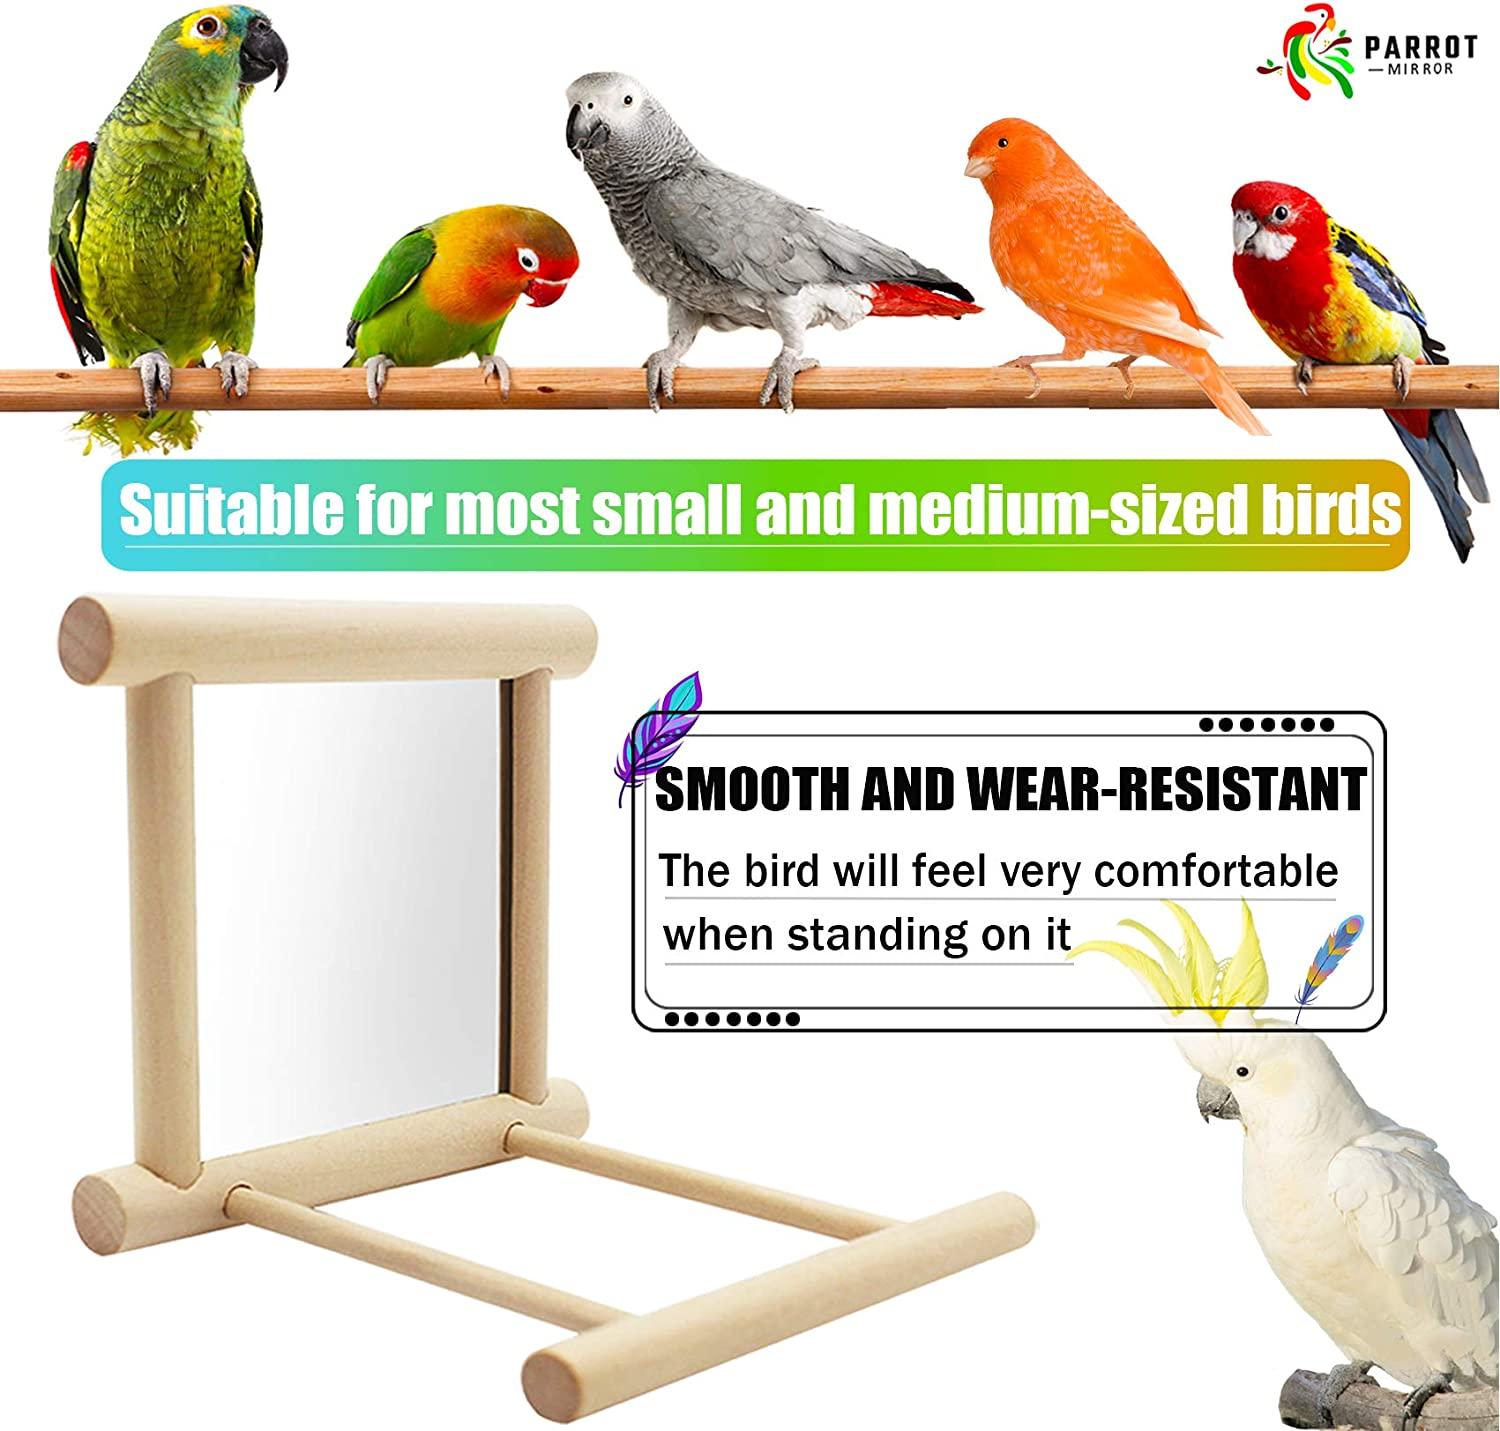 Blessed family Bird Parakeet Mirror for Cage,Parrot Perch Stand,Wooden  Hummingbird Swing Toy,Parakeet Accessories for Cockatiels Conure Finch  Lovebird Canary African Grey Macaw 1 piece of bird mirror